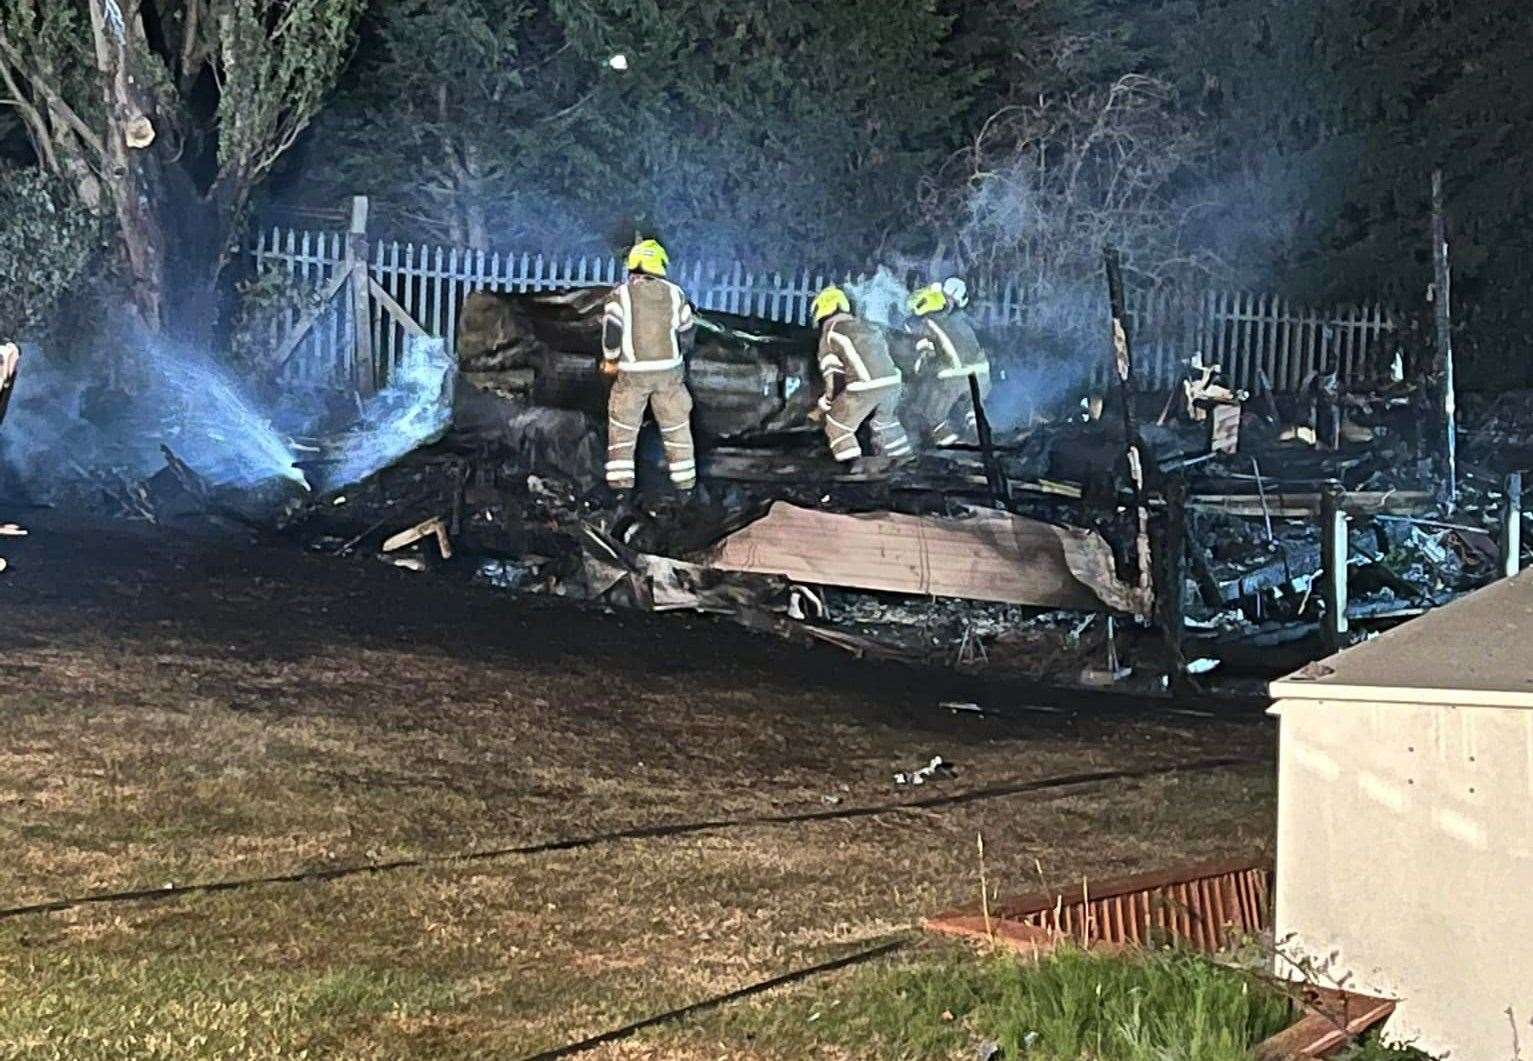 The caravan fire at Shurland Dale Holiday Park, Eastchurch